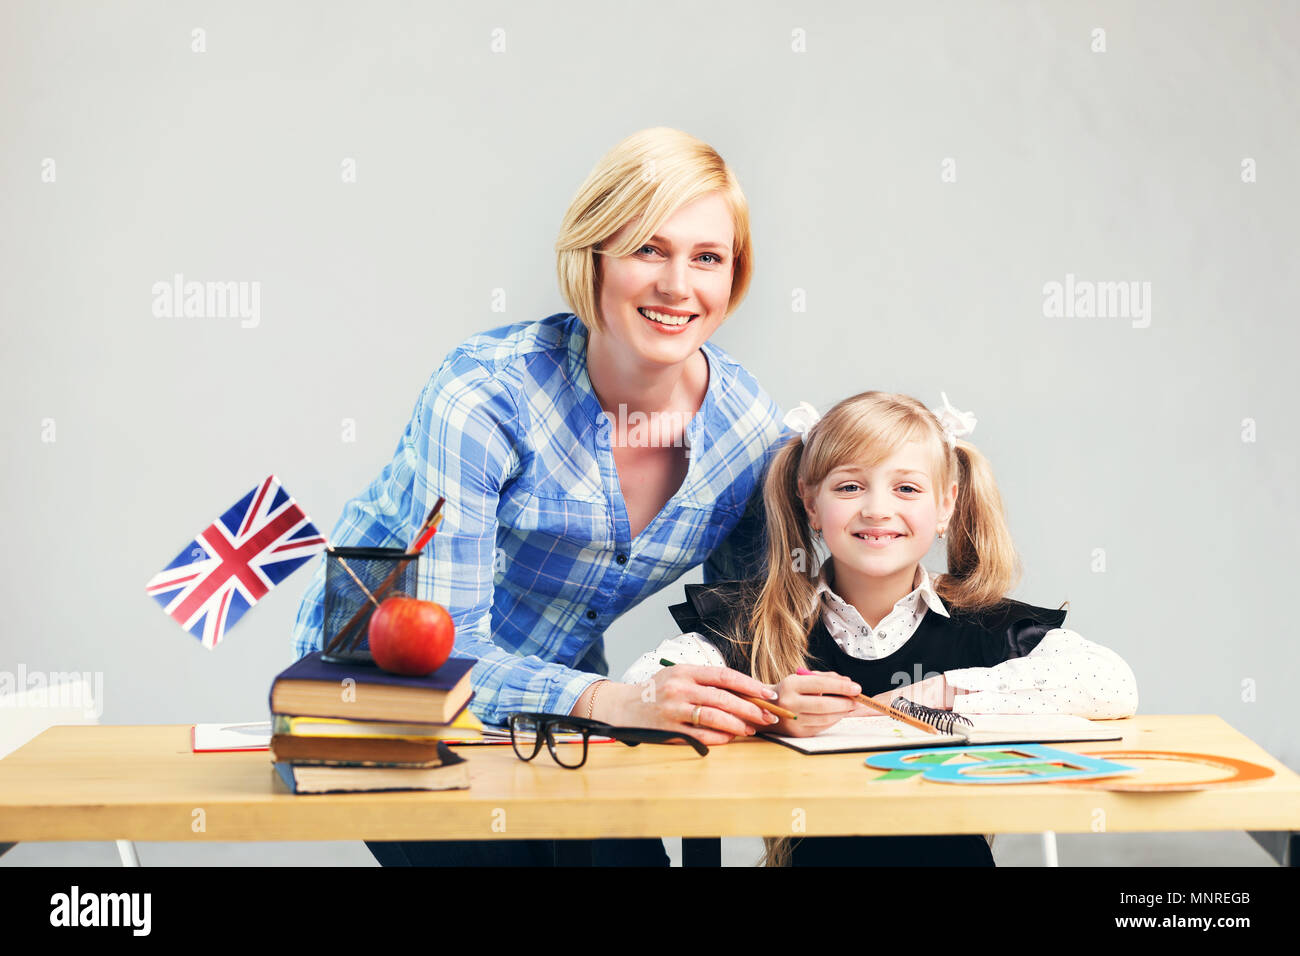 Woman educator helps kid girl to learn English language, school table with books, flag and letters in light classroom Stock Photo